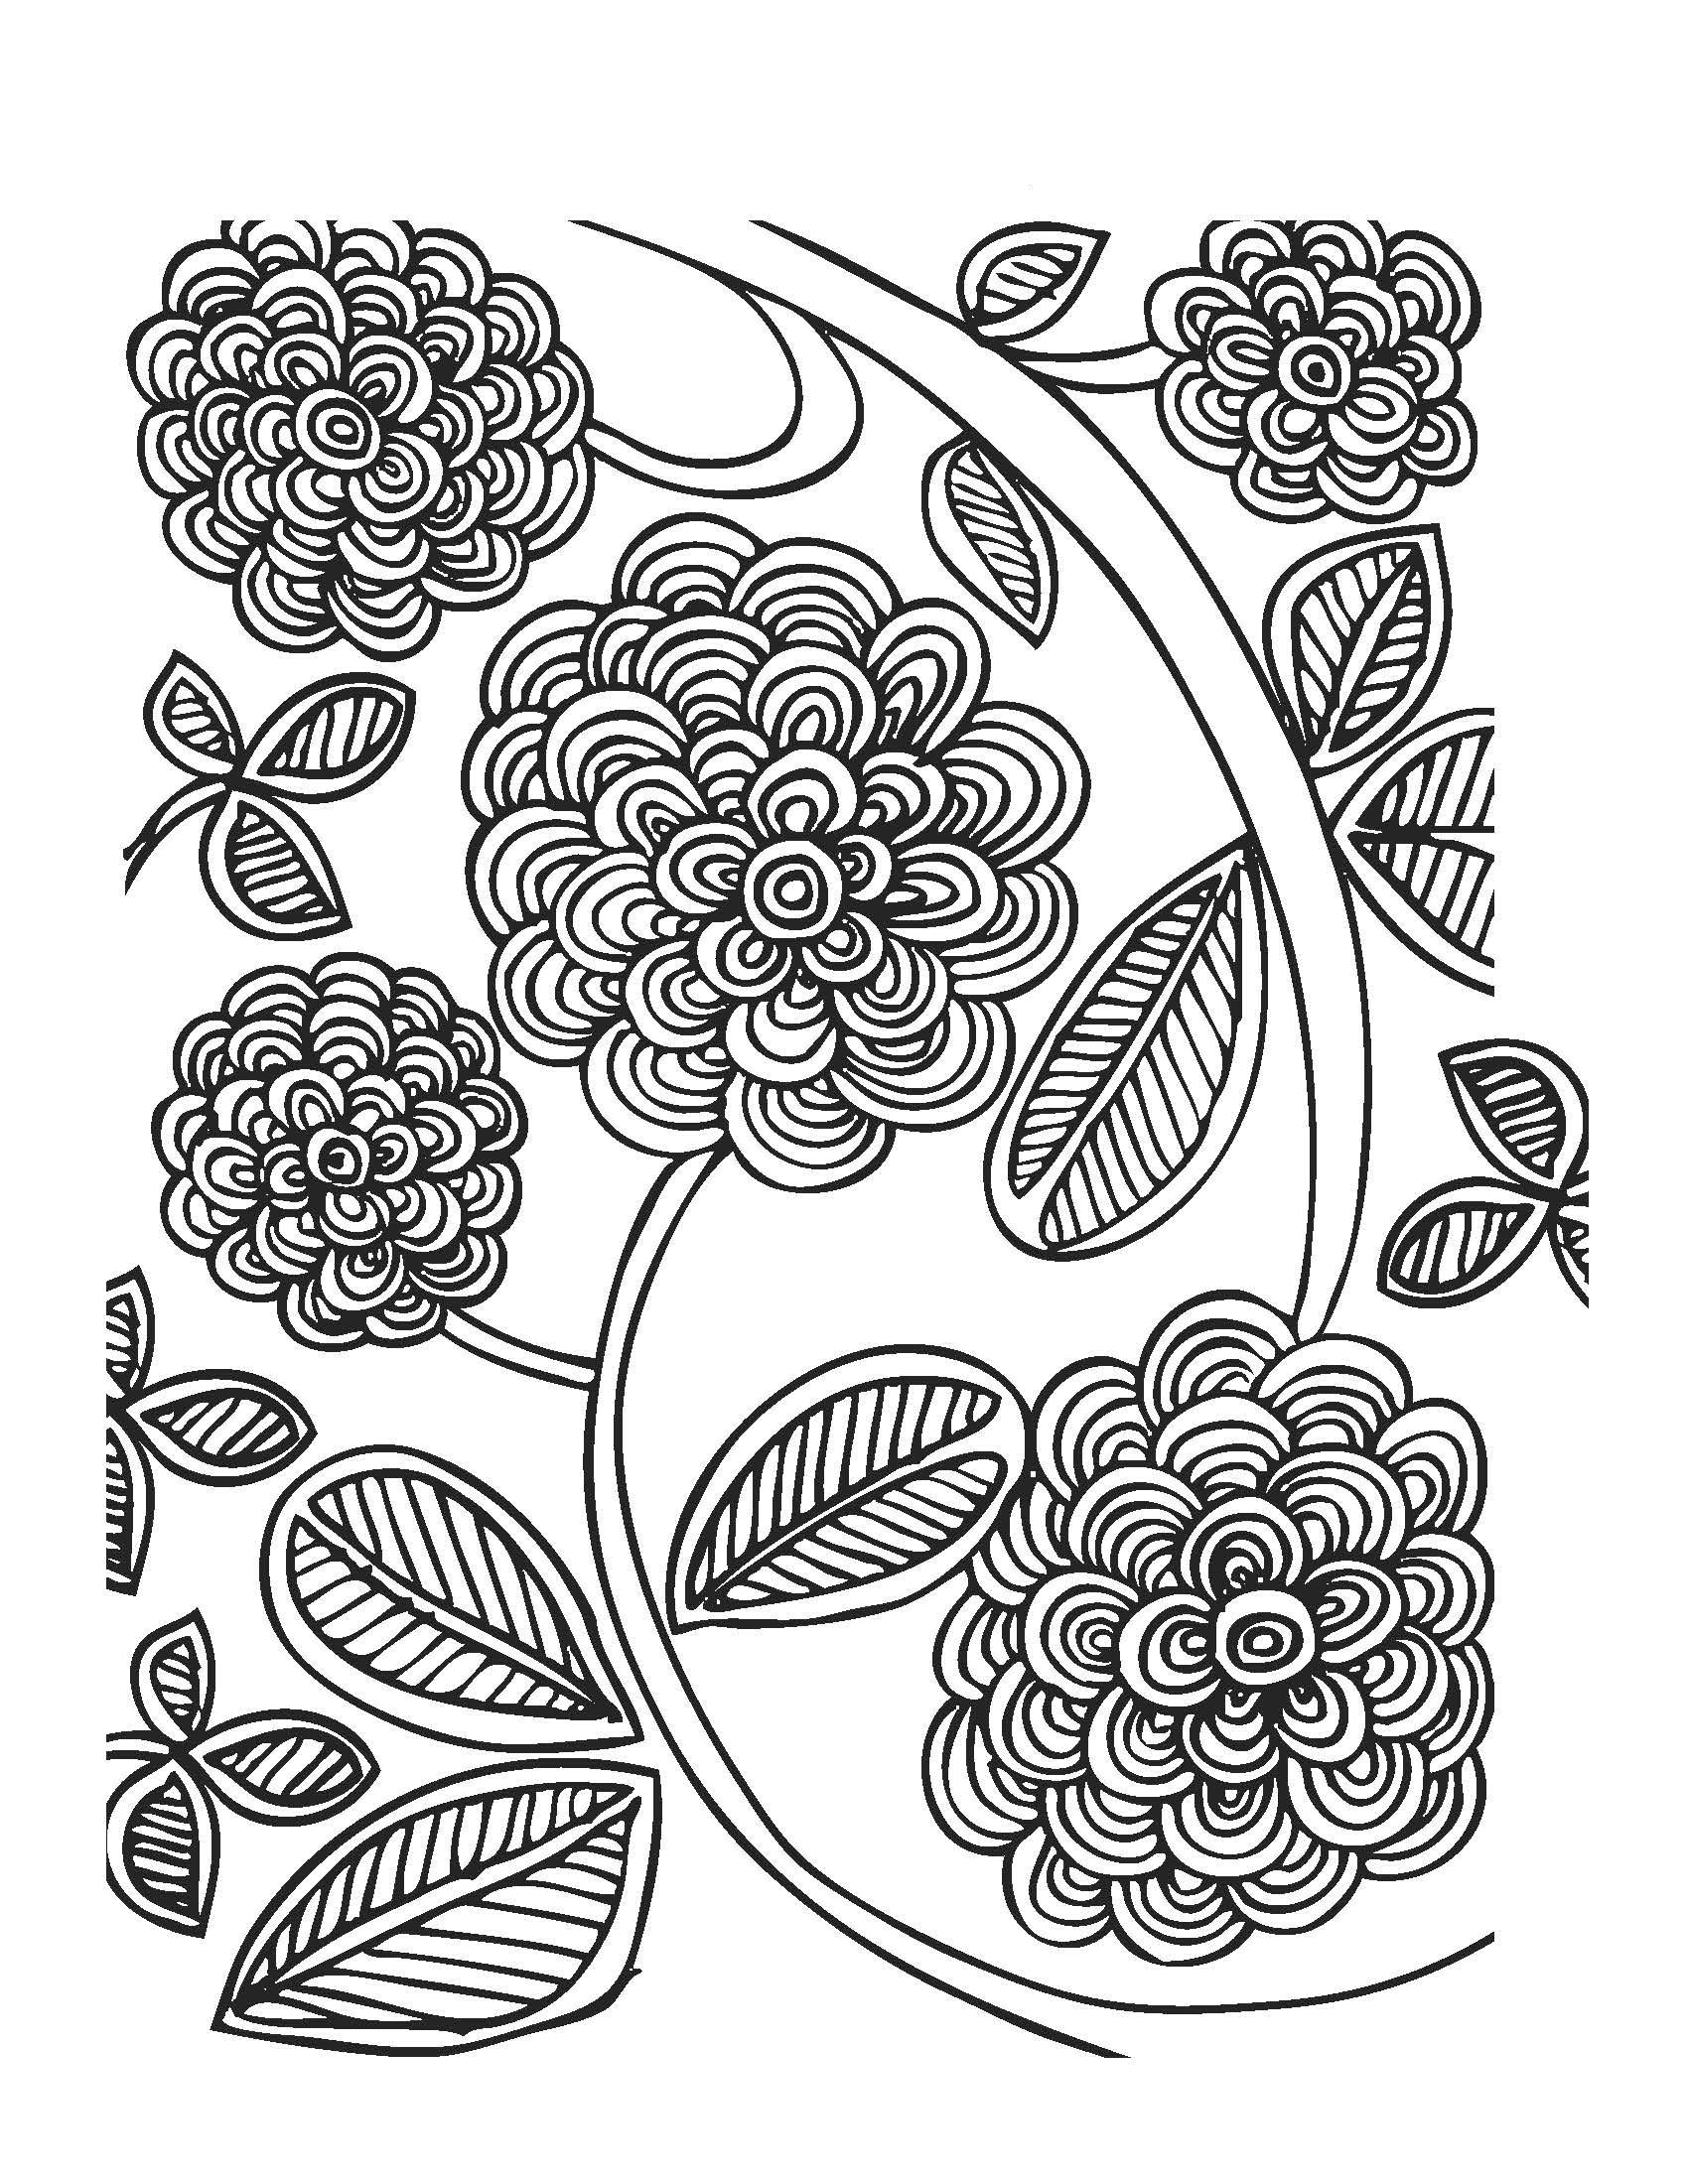 Butterfly Simple But Hard Coloring Page - Free Coloring ...